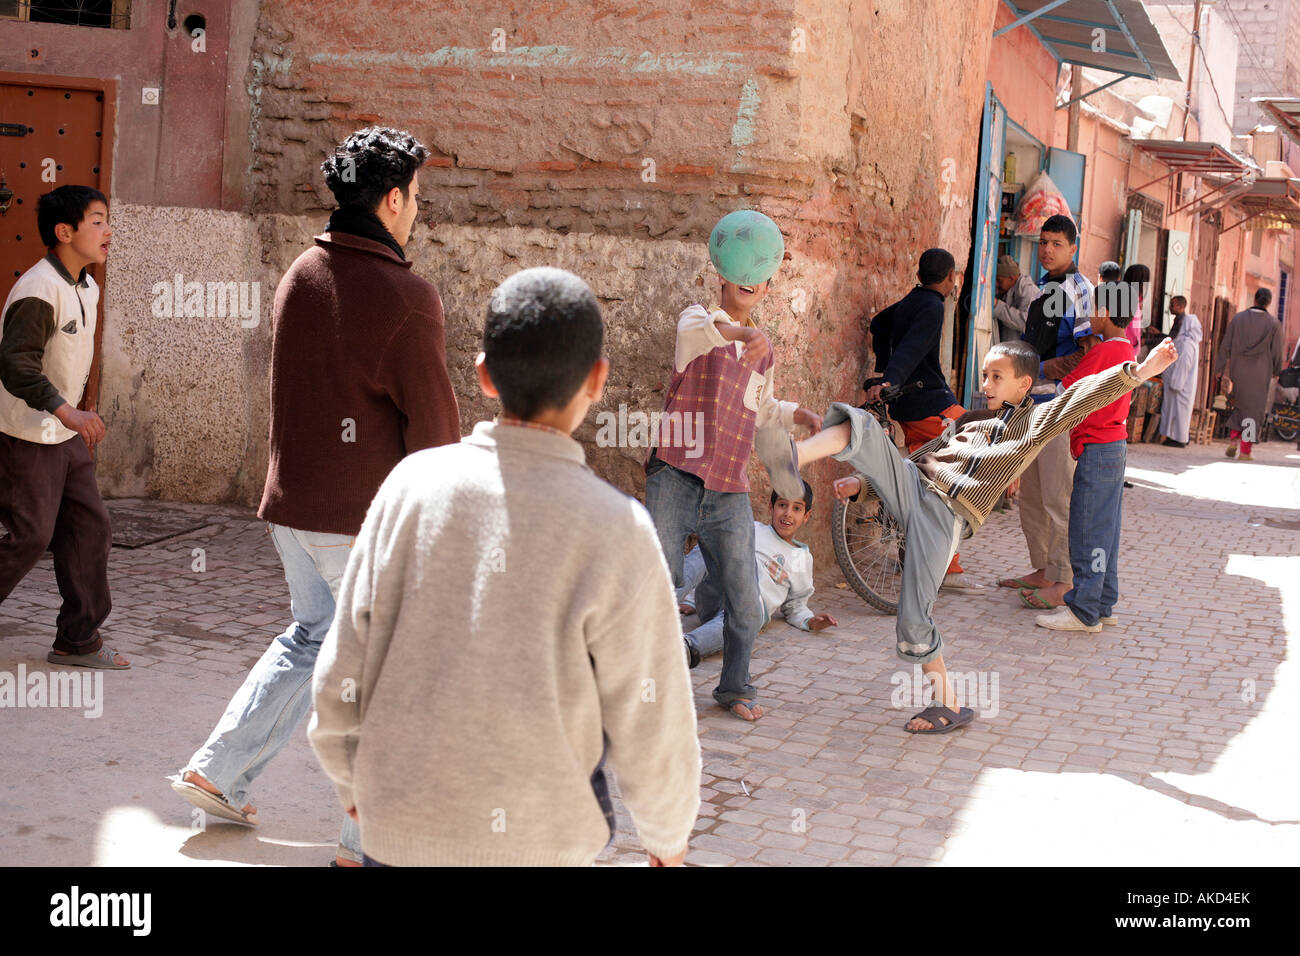 Playing football in the street Marrakech Morocco north Africa March 2007 Stock Photo